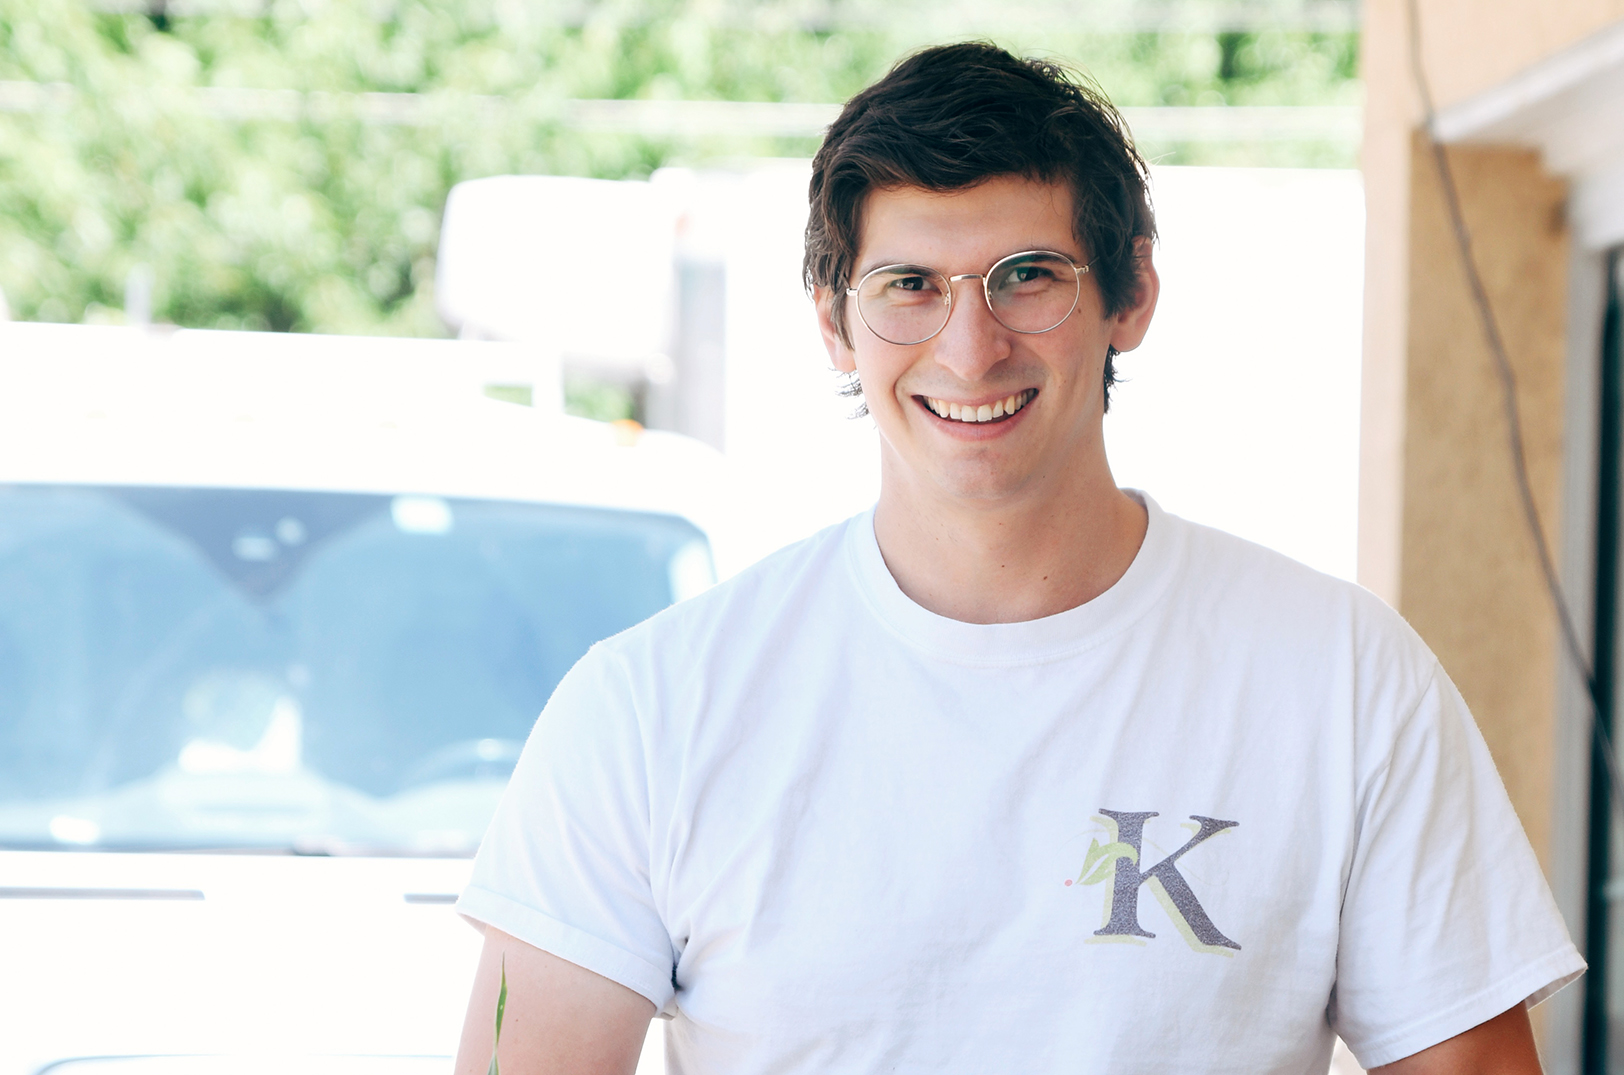 Max Kaniger, Kanbe’s Markets named ‘changemaker’ by Triscuit, earning $50K grant